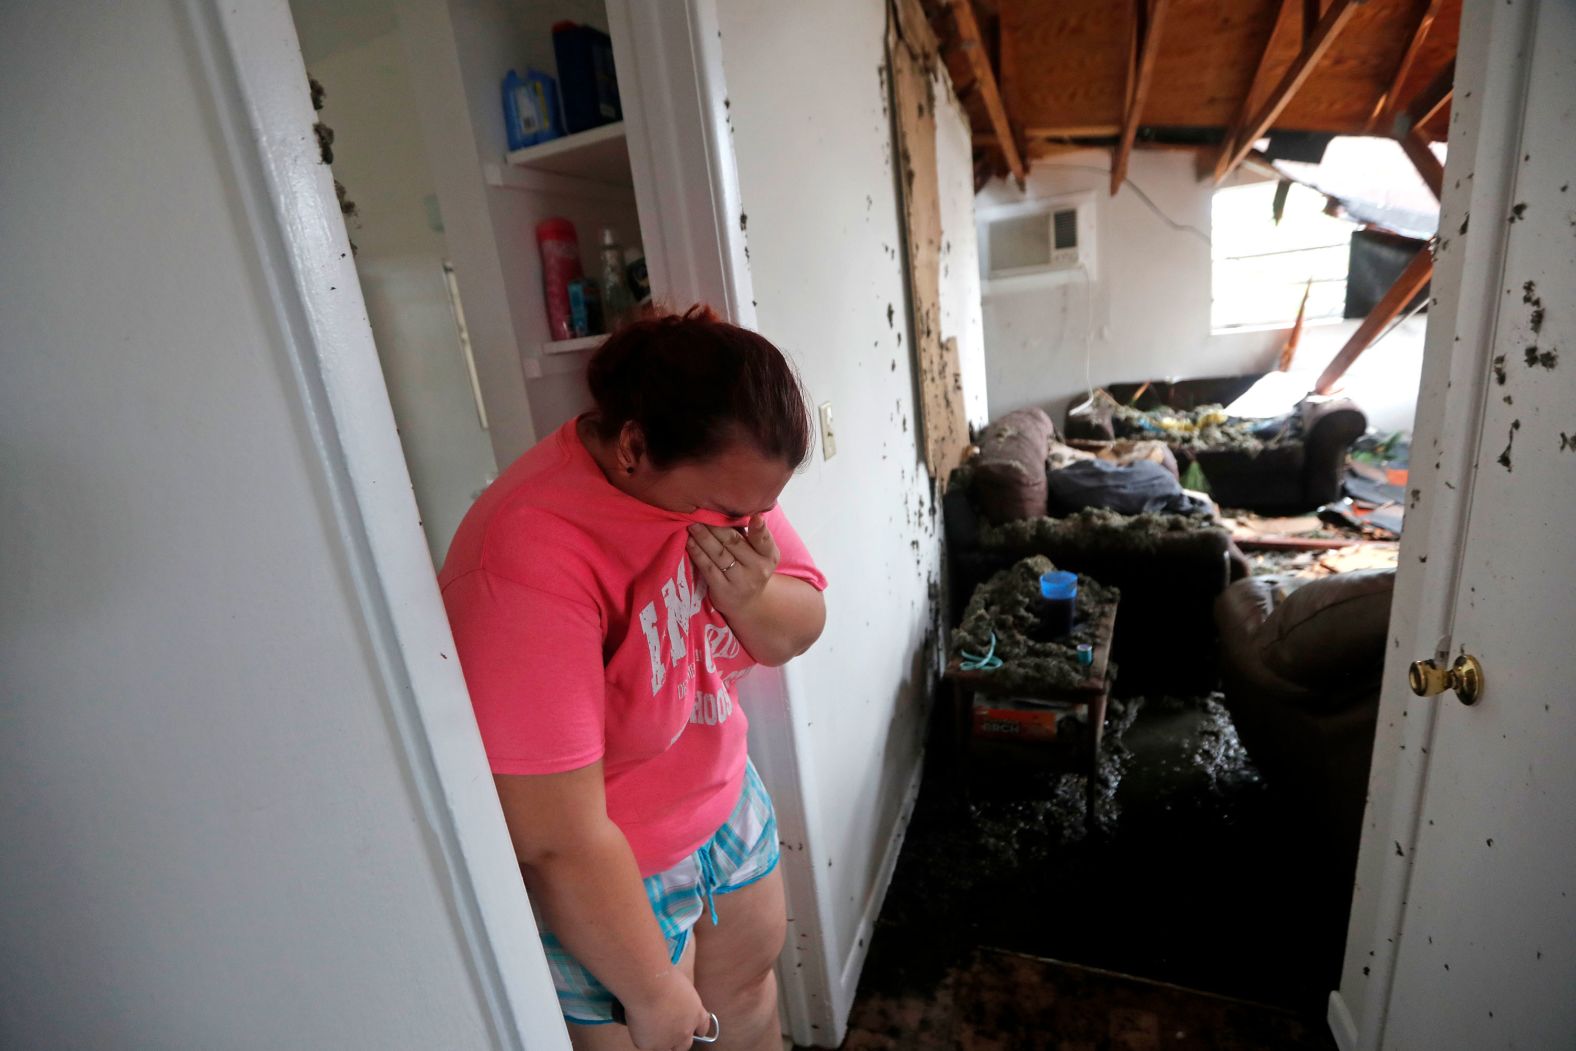 Kaylee O'Brian cries inside her Panama City home after several trees fell on it on October 10.